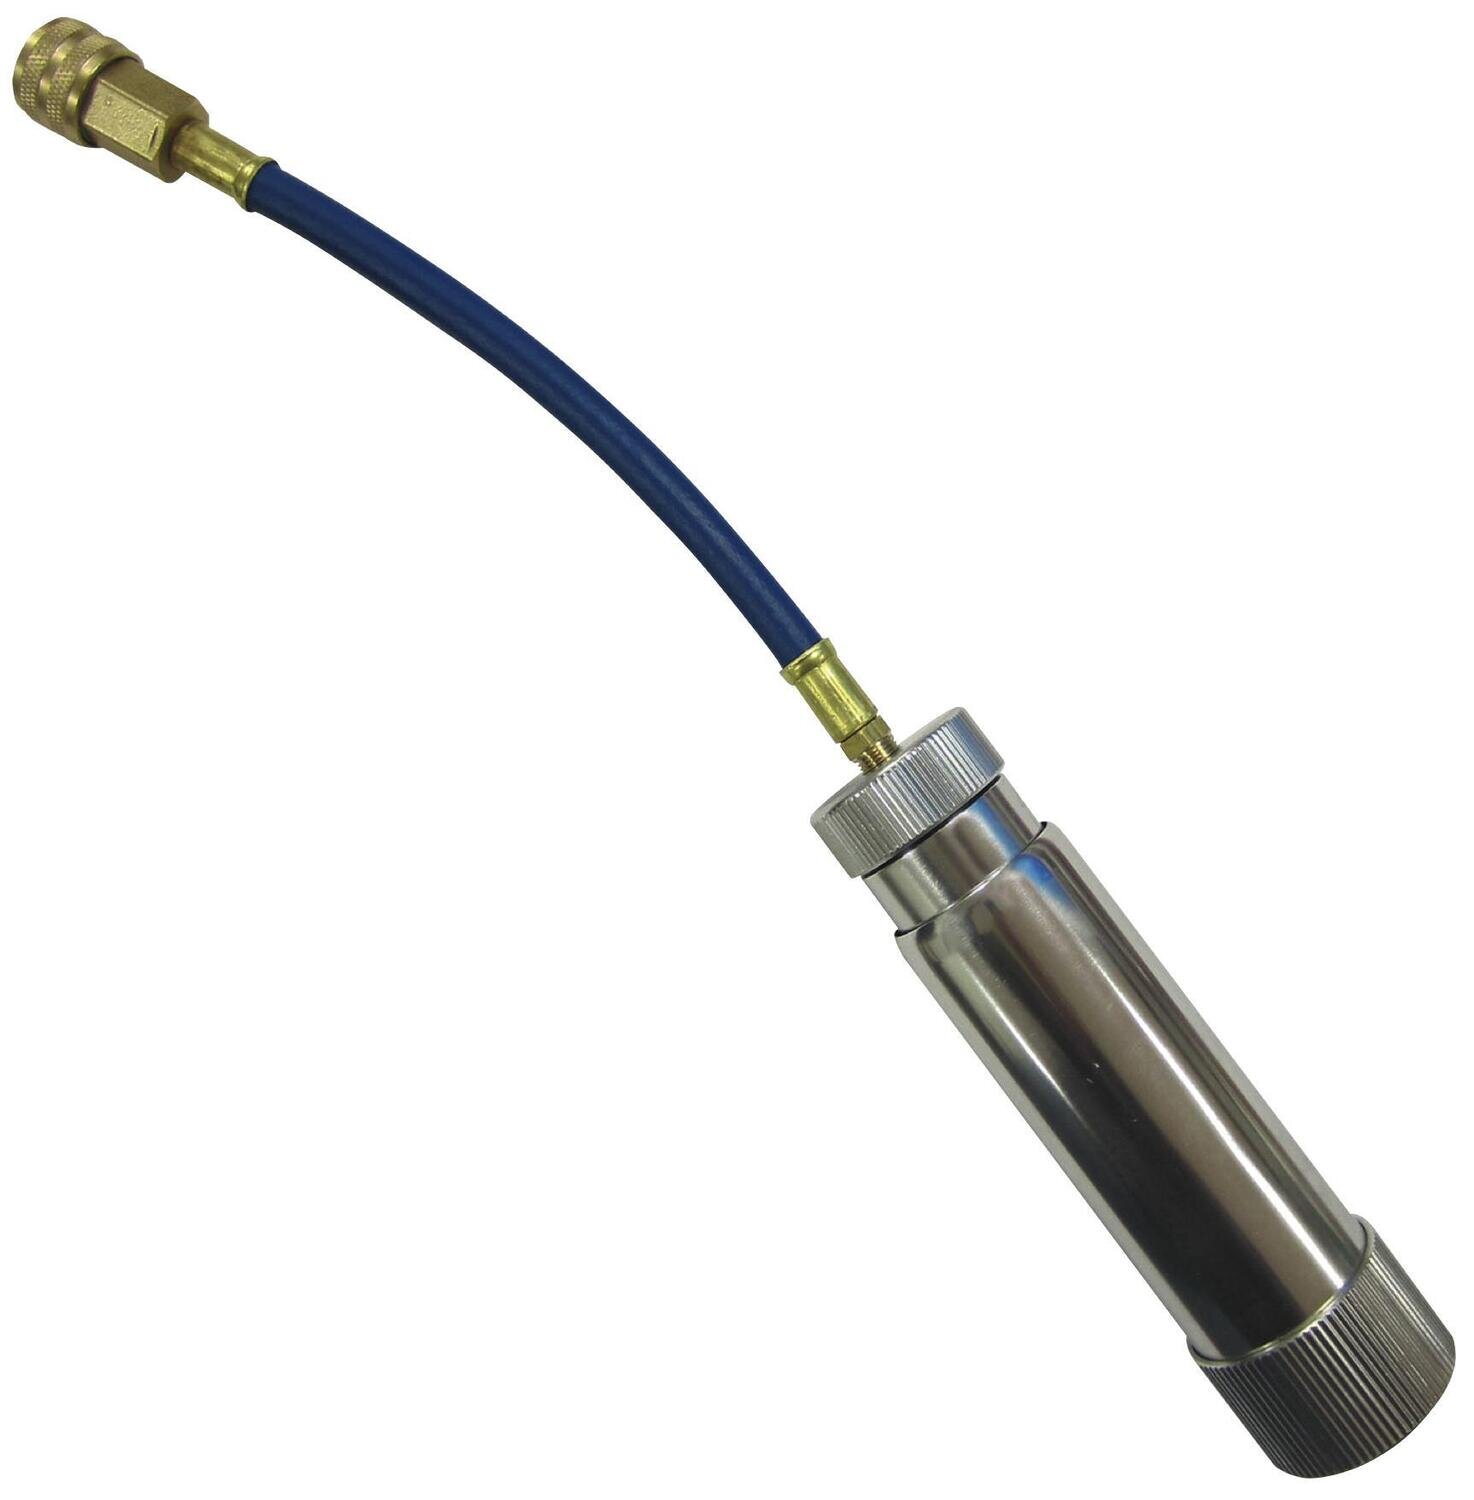 MCL53134A - Refillable Universal Dye / Oil Injector